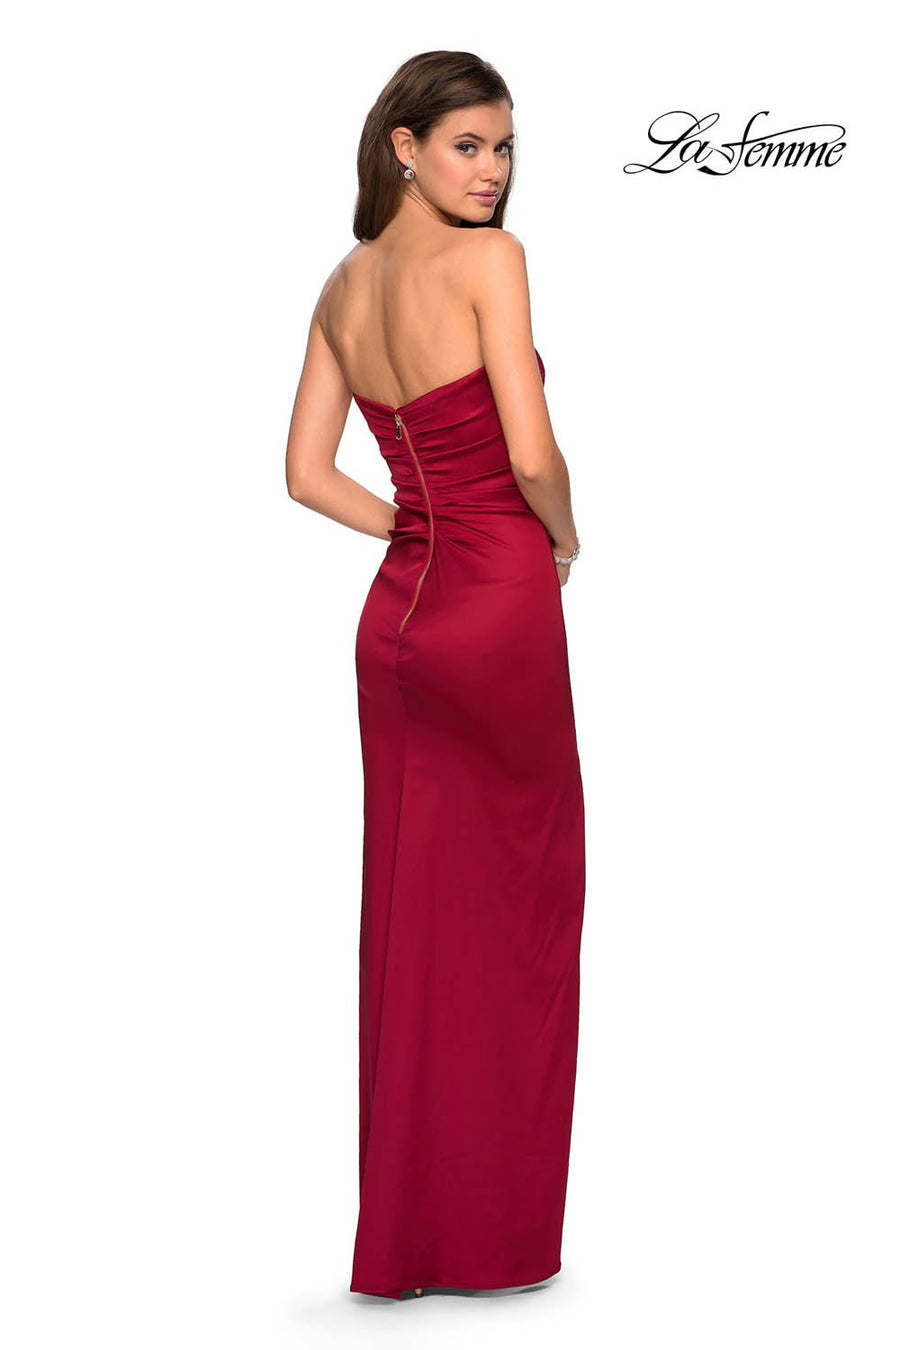 La Femme 27787 prom dress images.  La Femme 27787 is available in these colors: Black, Burgundy.